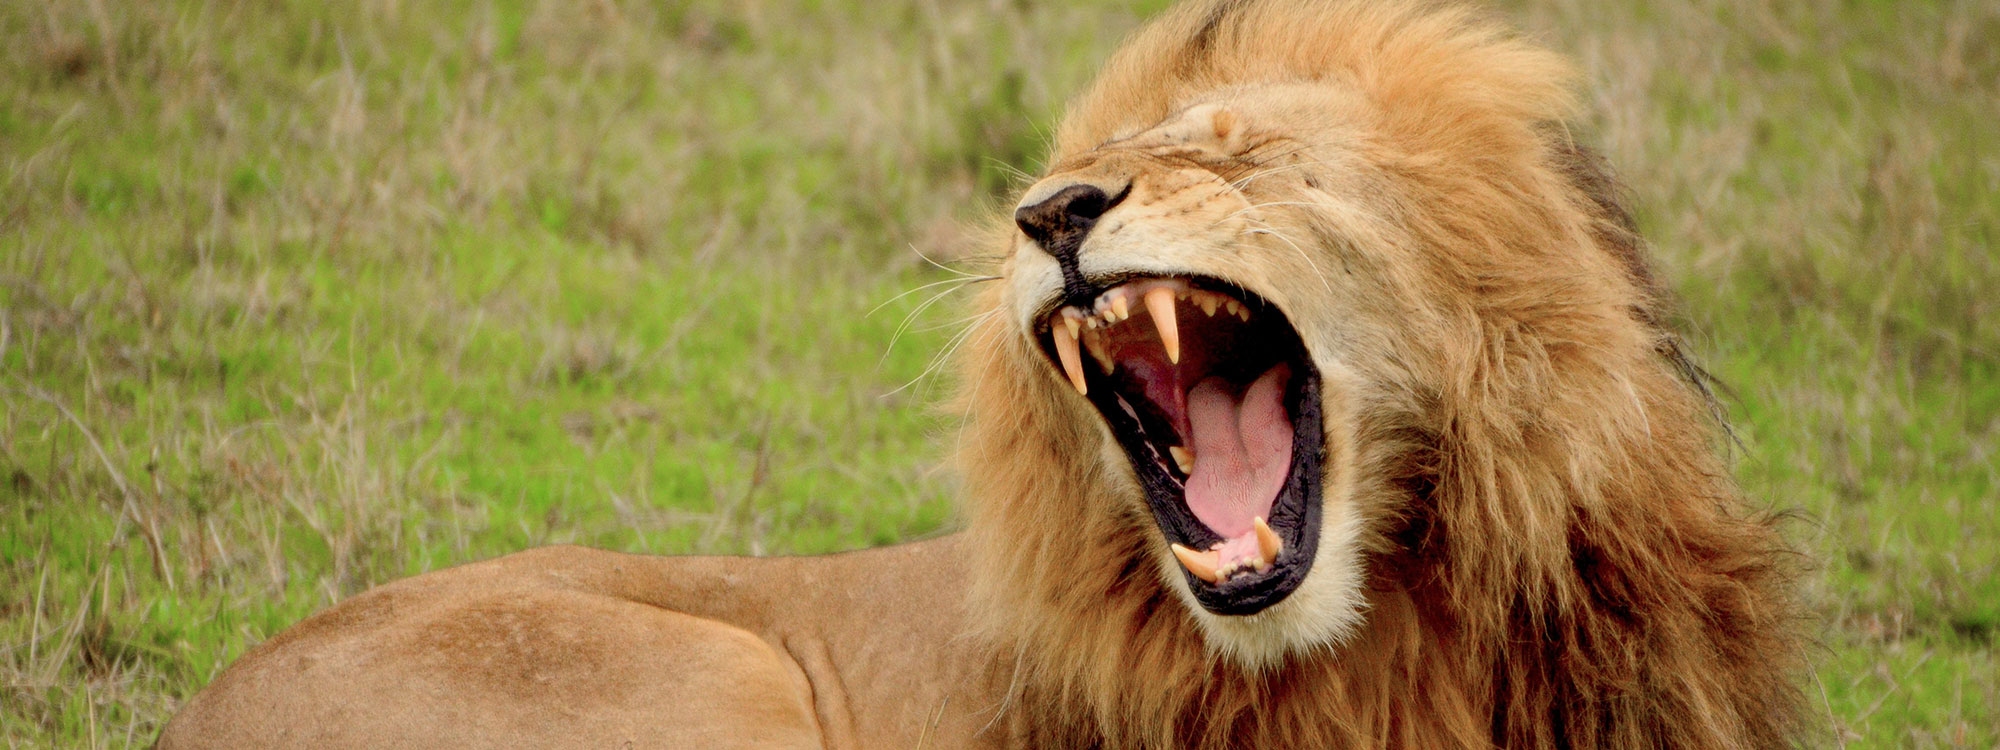 A male lion with his mouth open